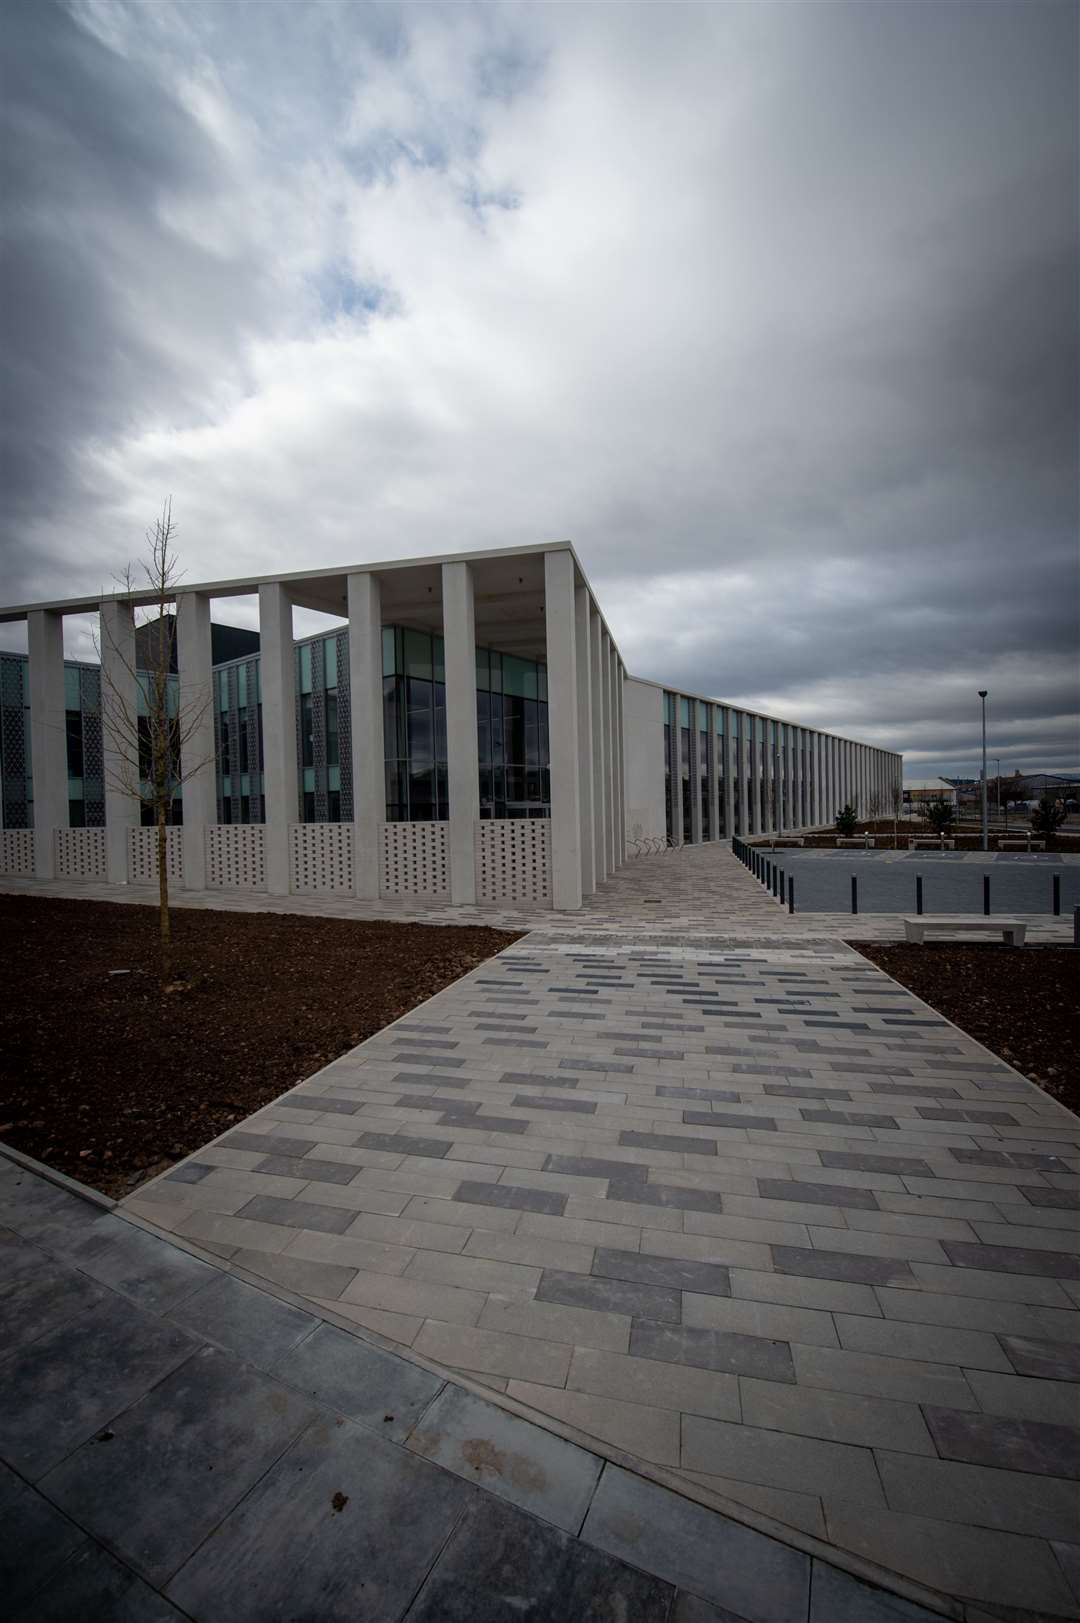 New Justice Centre in Inverness.